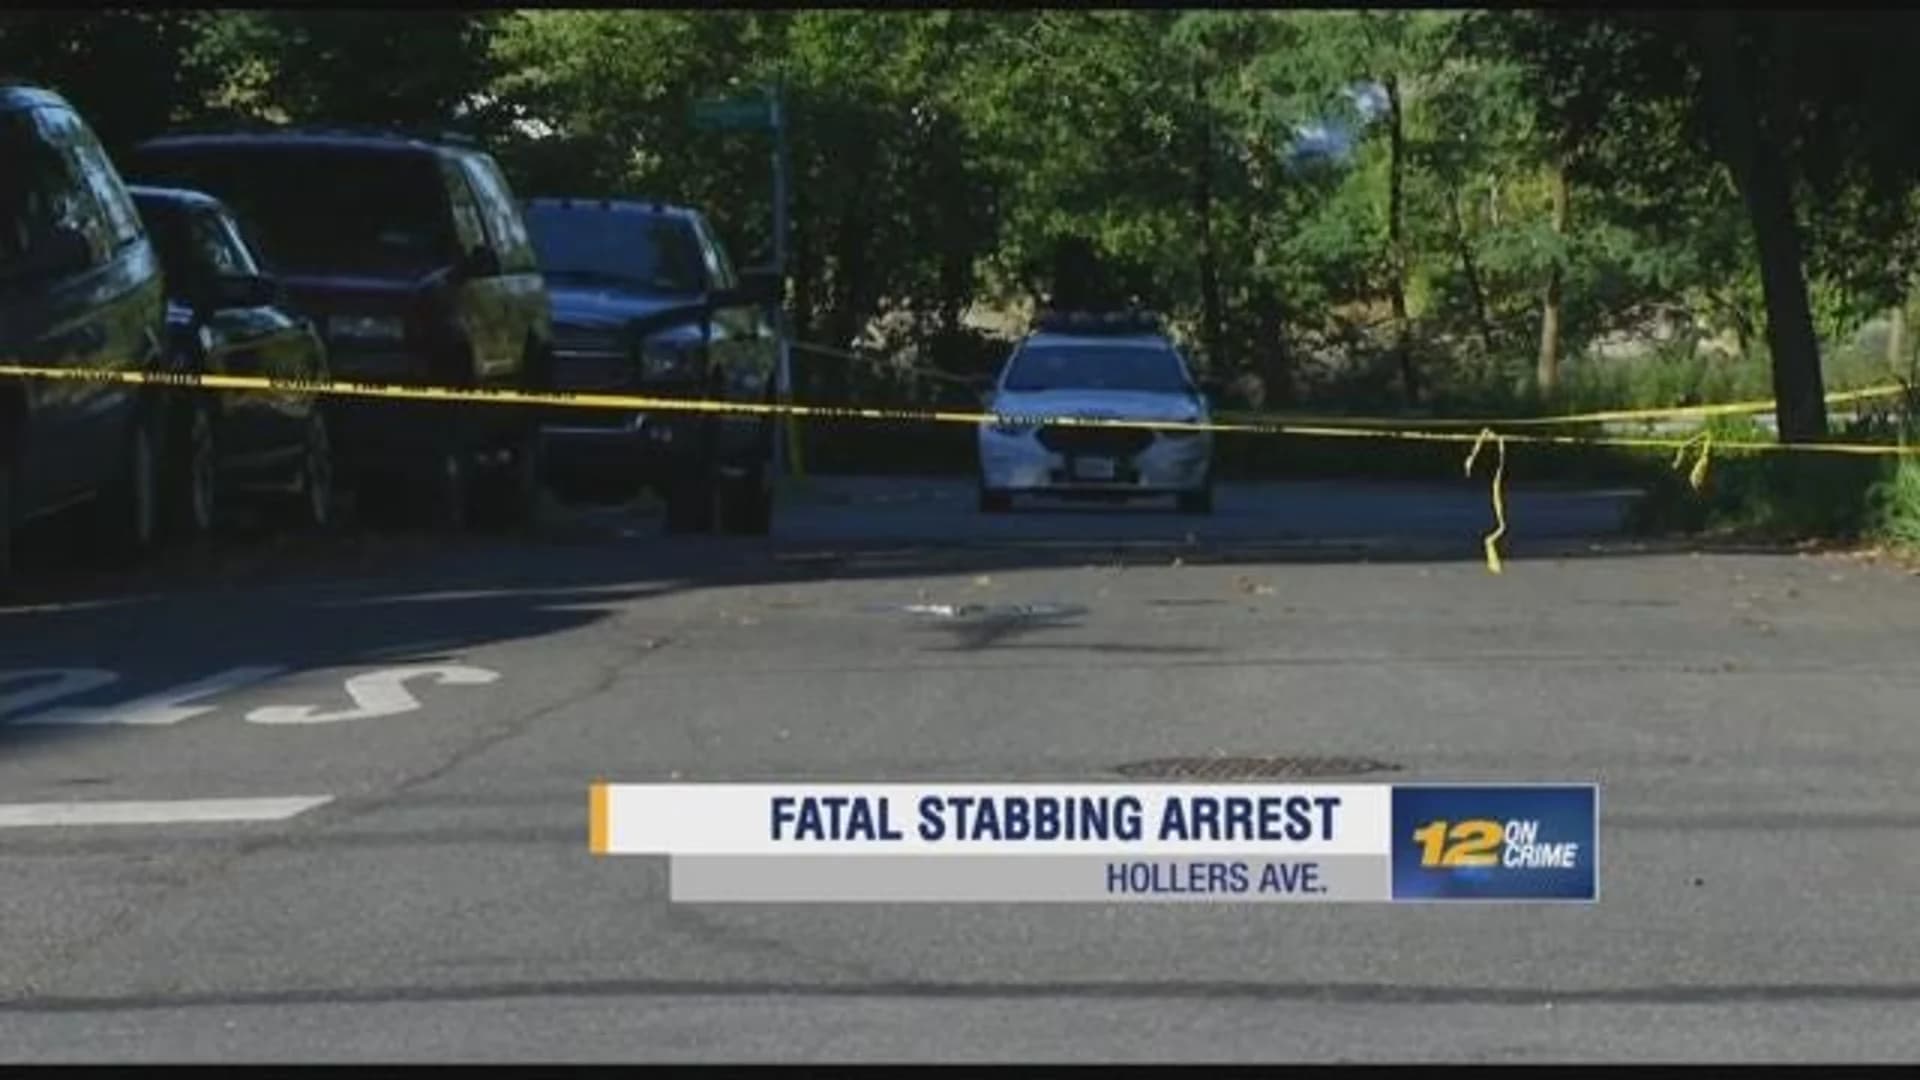 Police: Man admitted to deadly road rage stabbing